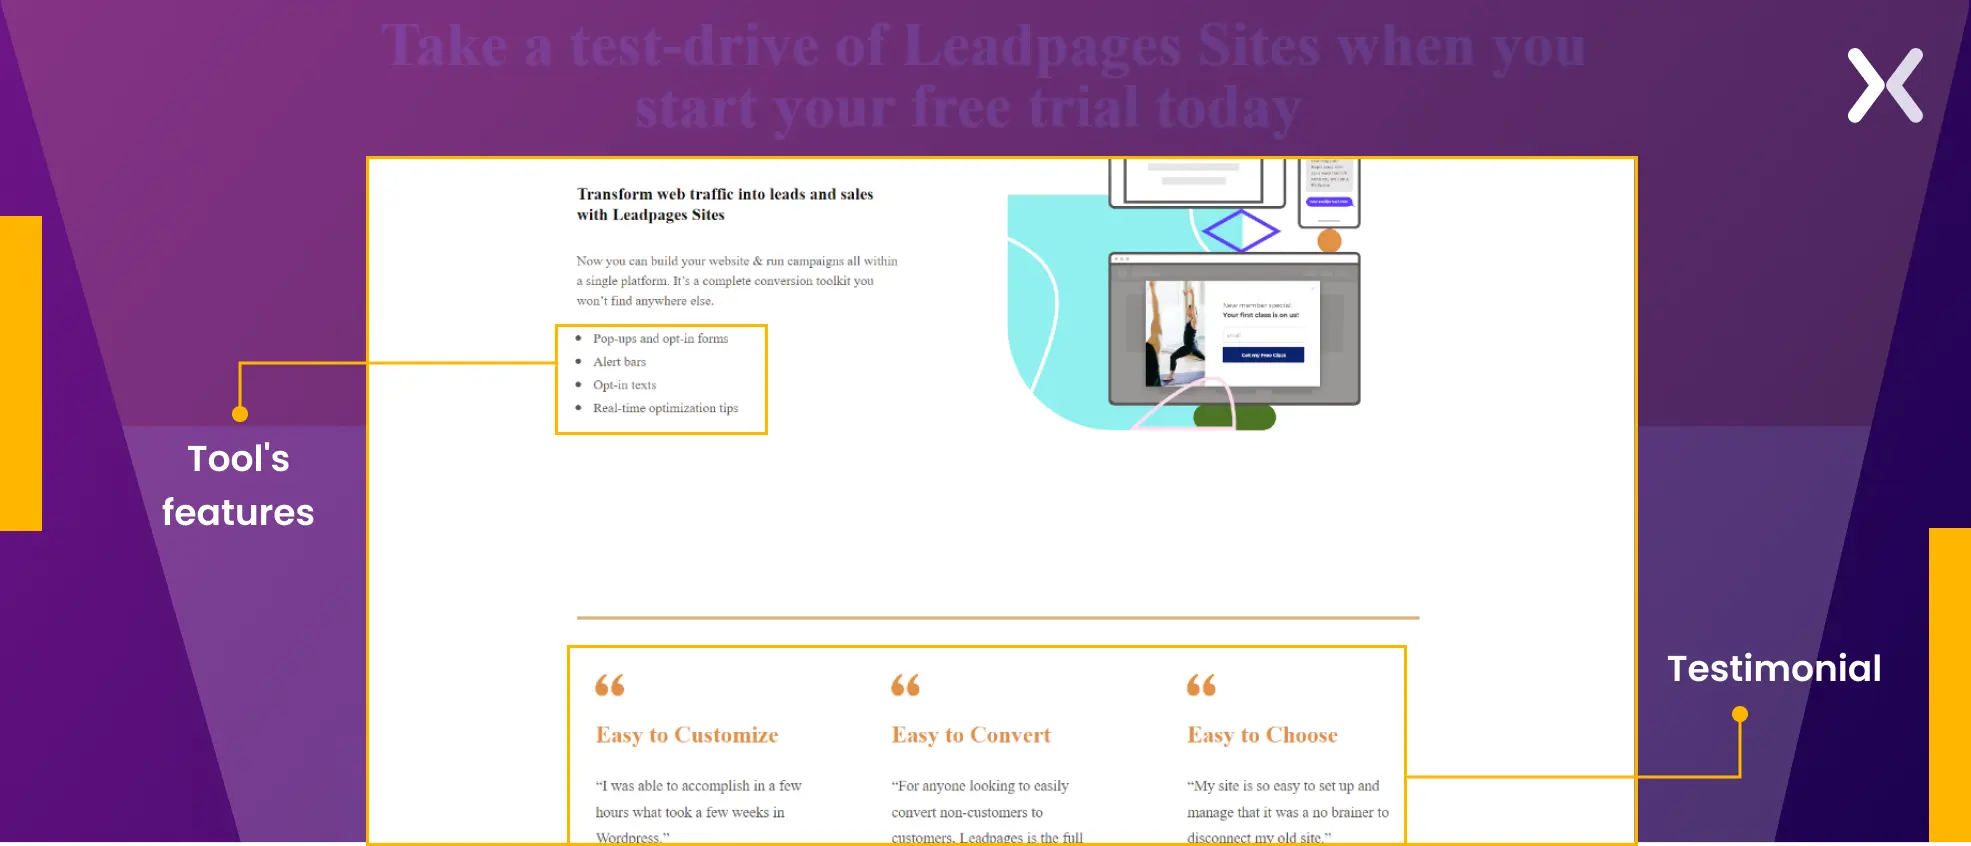 free-trial-landing-page-features-design.webp